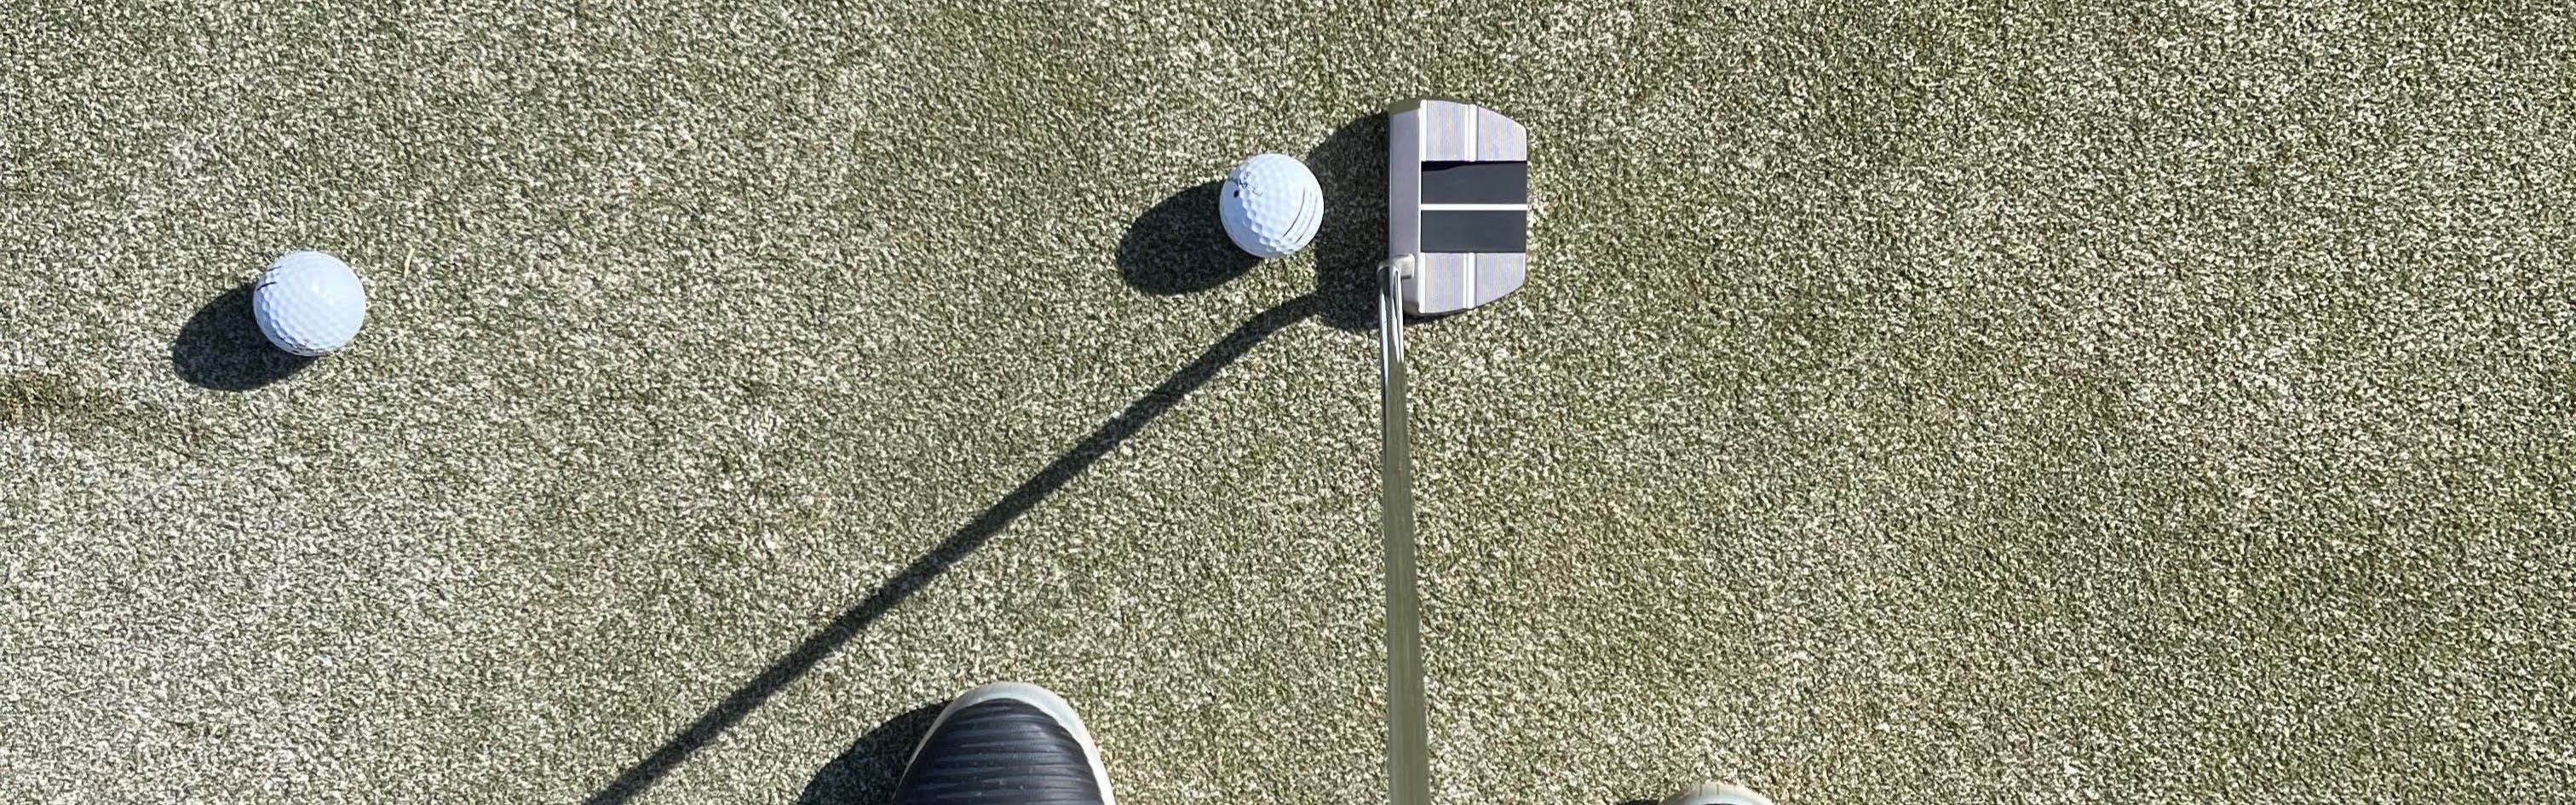 Top down view of the Cleveland HB Soft Milled #10.5 Slant Neck Putter.